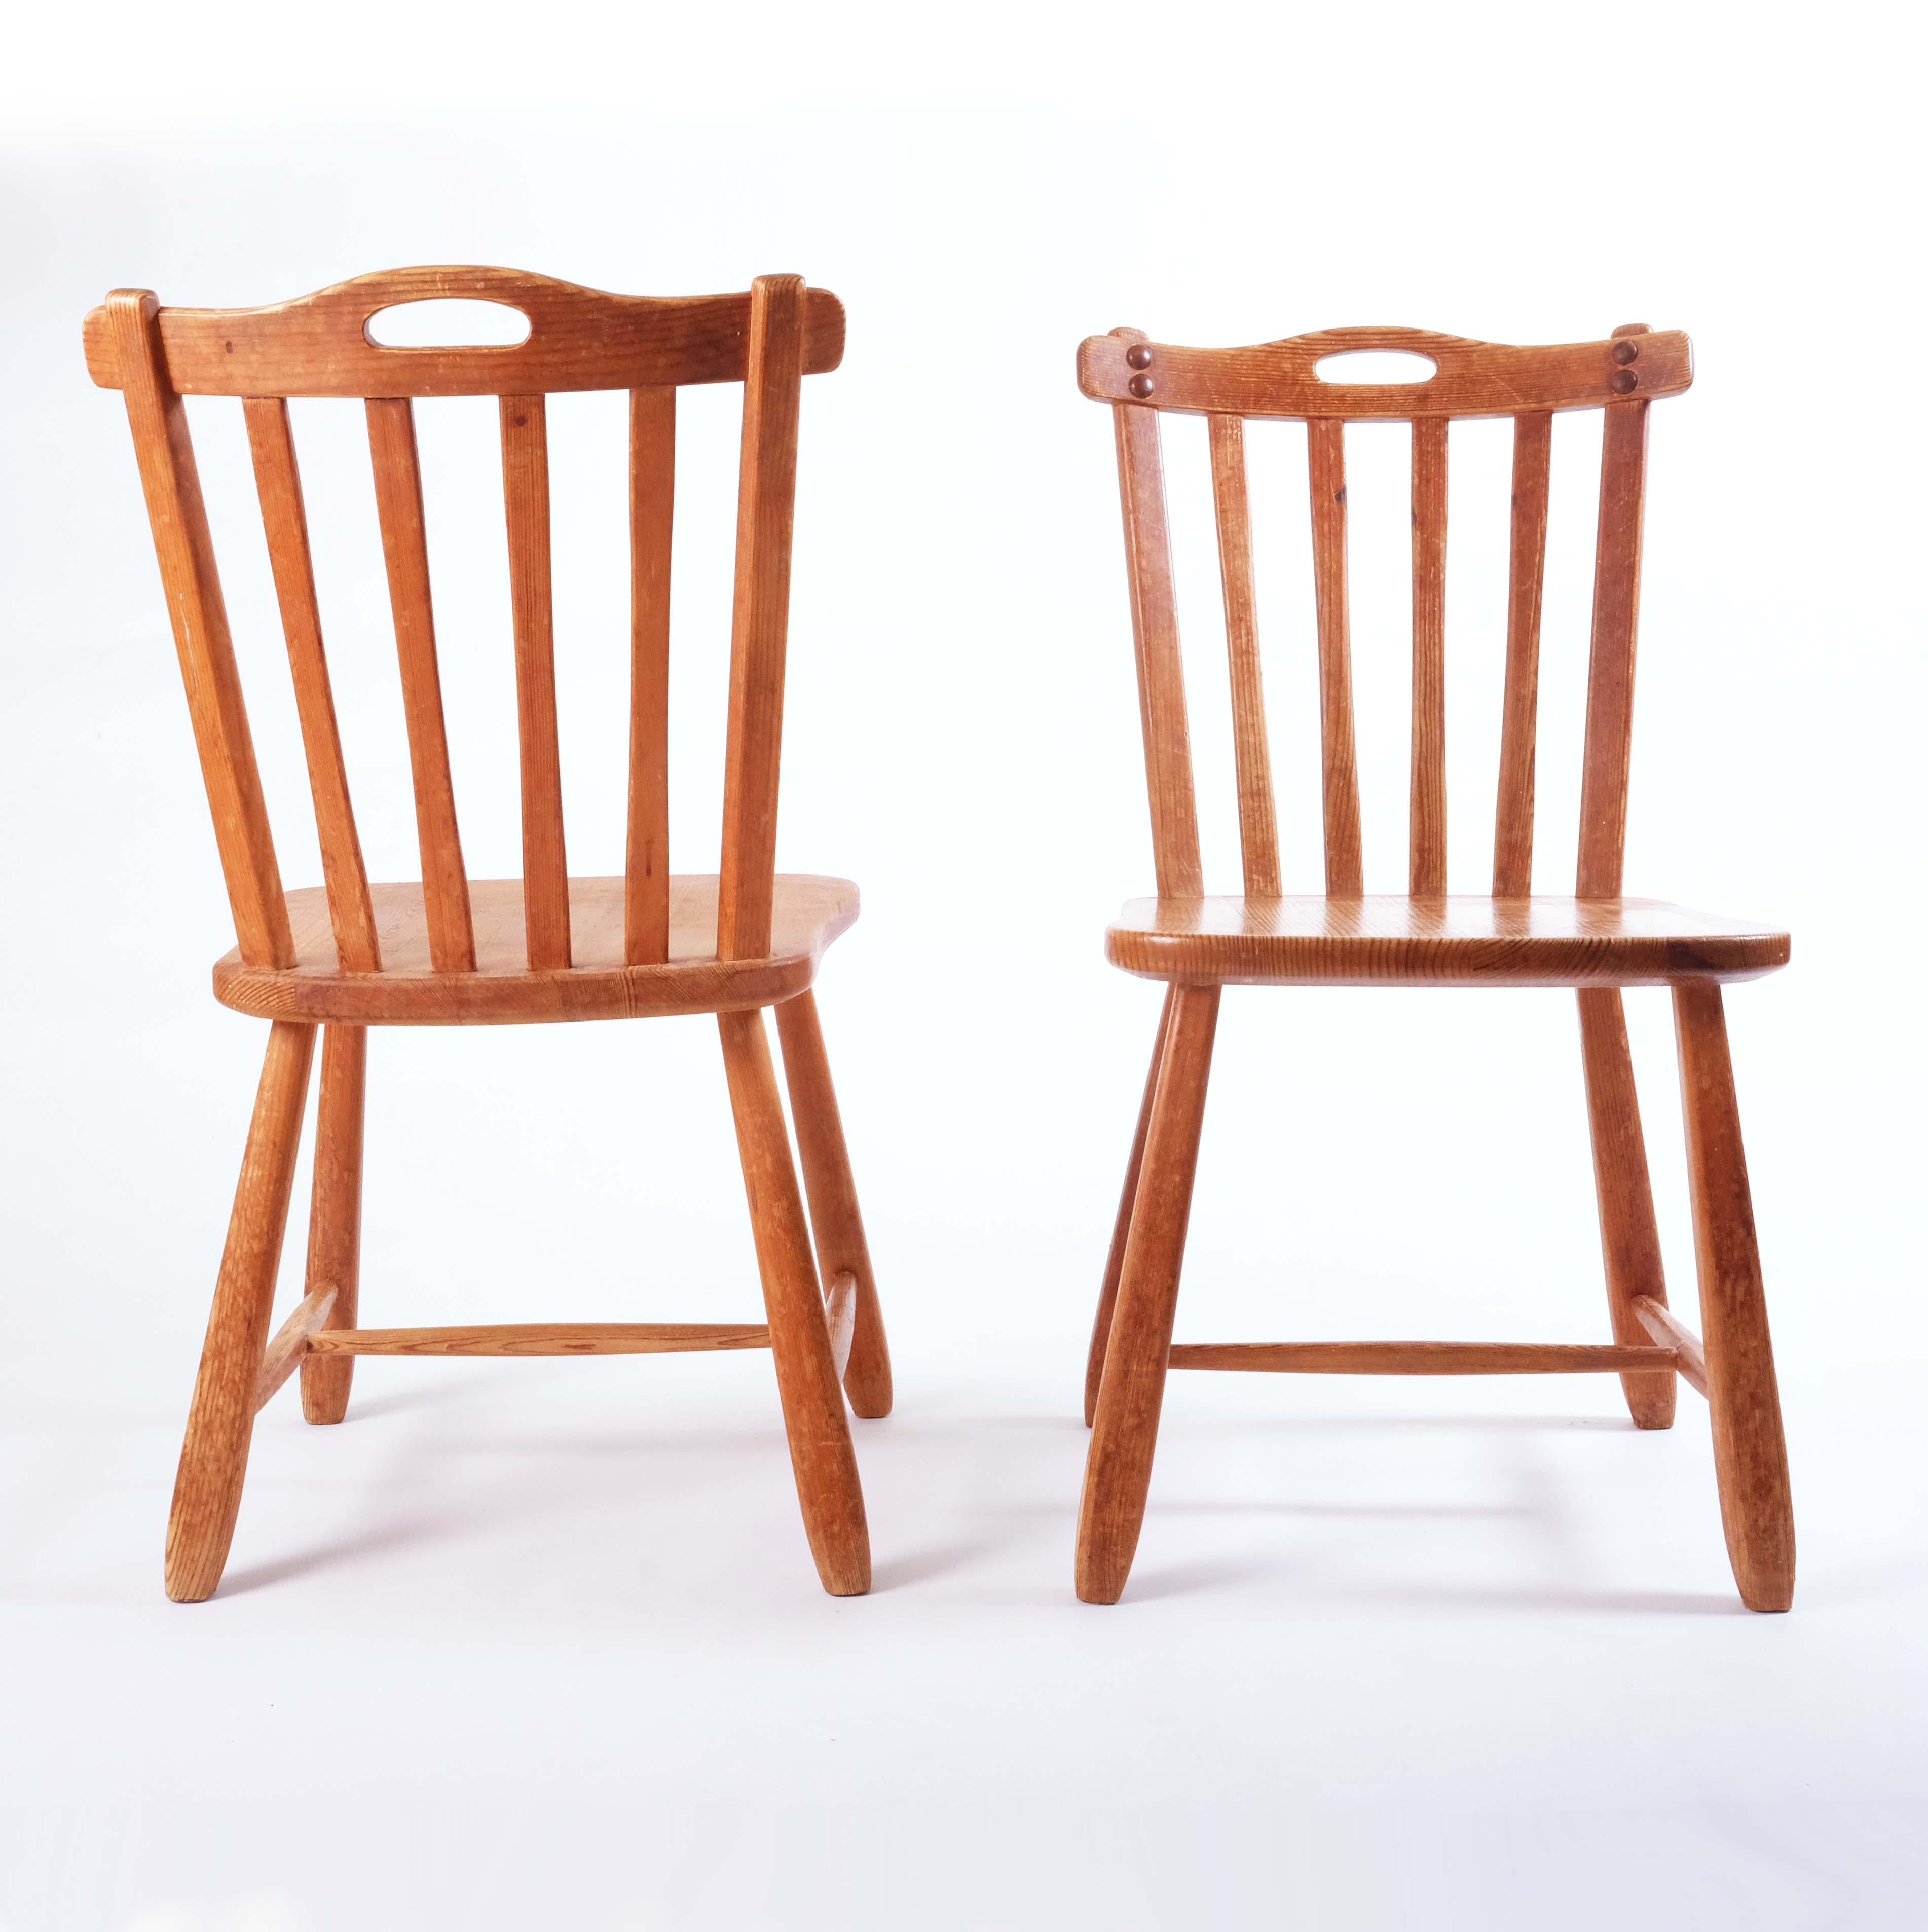 Mid-20th Century Two Swedish Sport Cabin Chairs in Pine by David Rosén for NK, Sweden